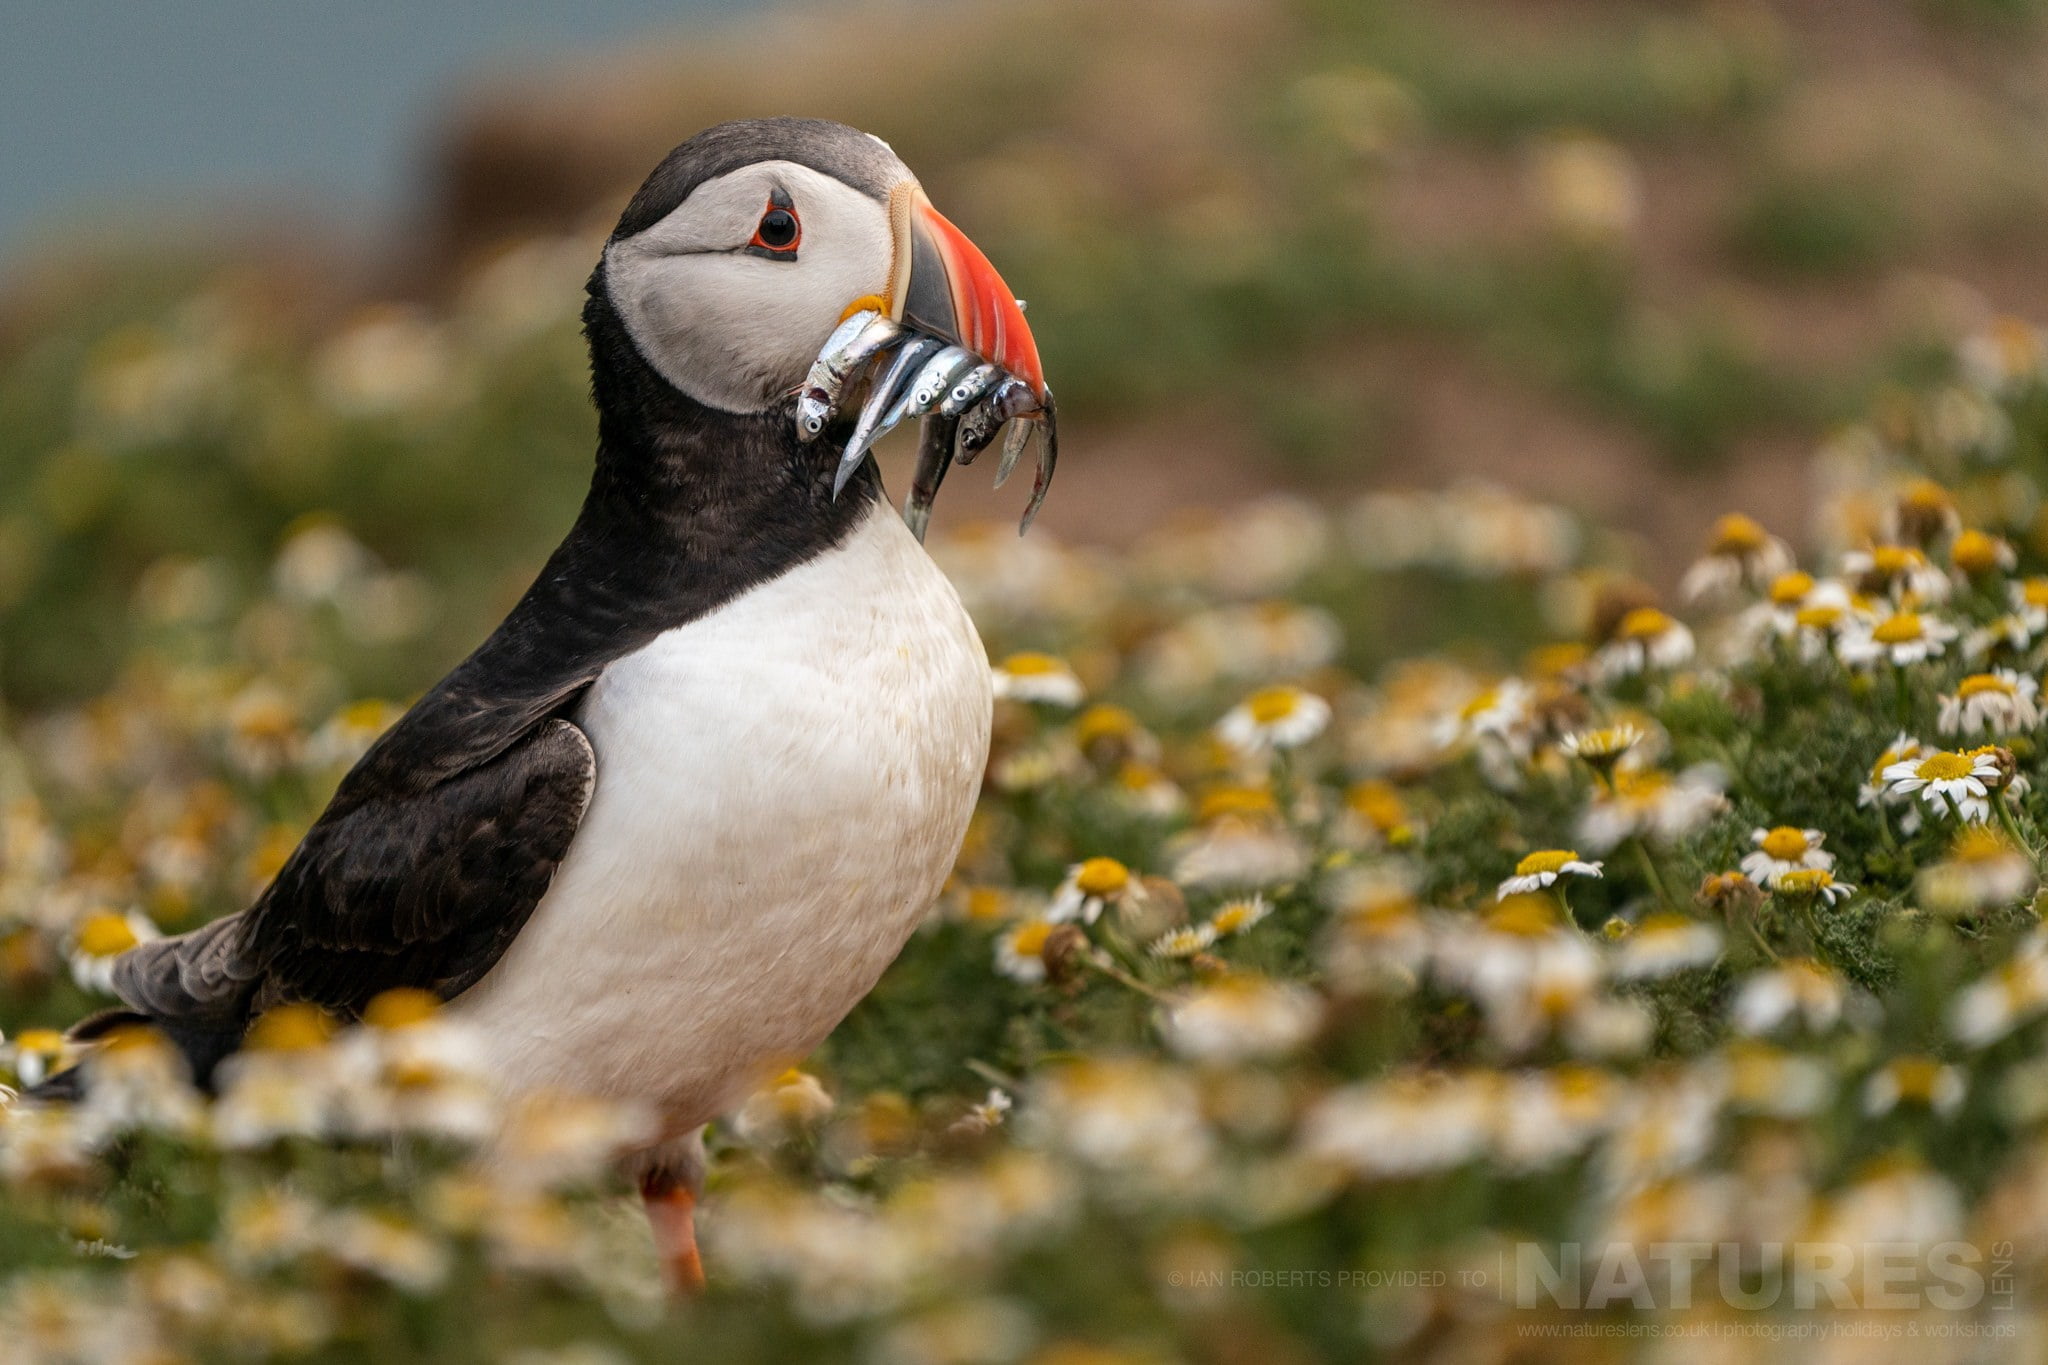 One of the Welsh Puffins of Skomer Island